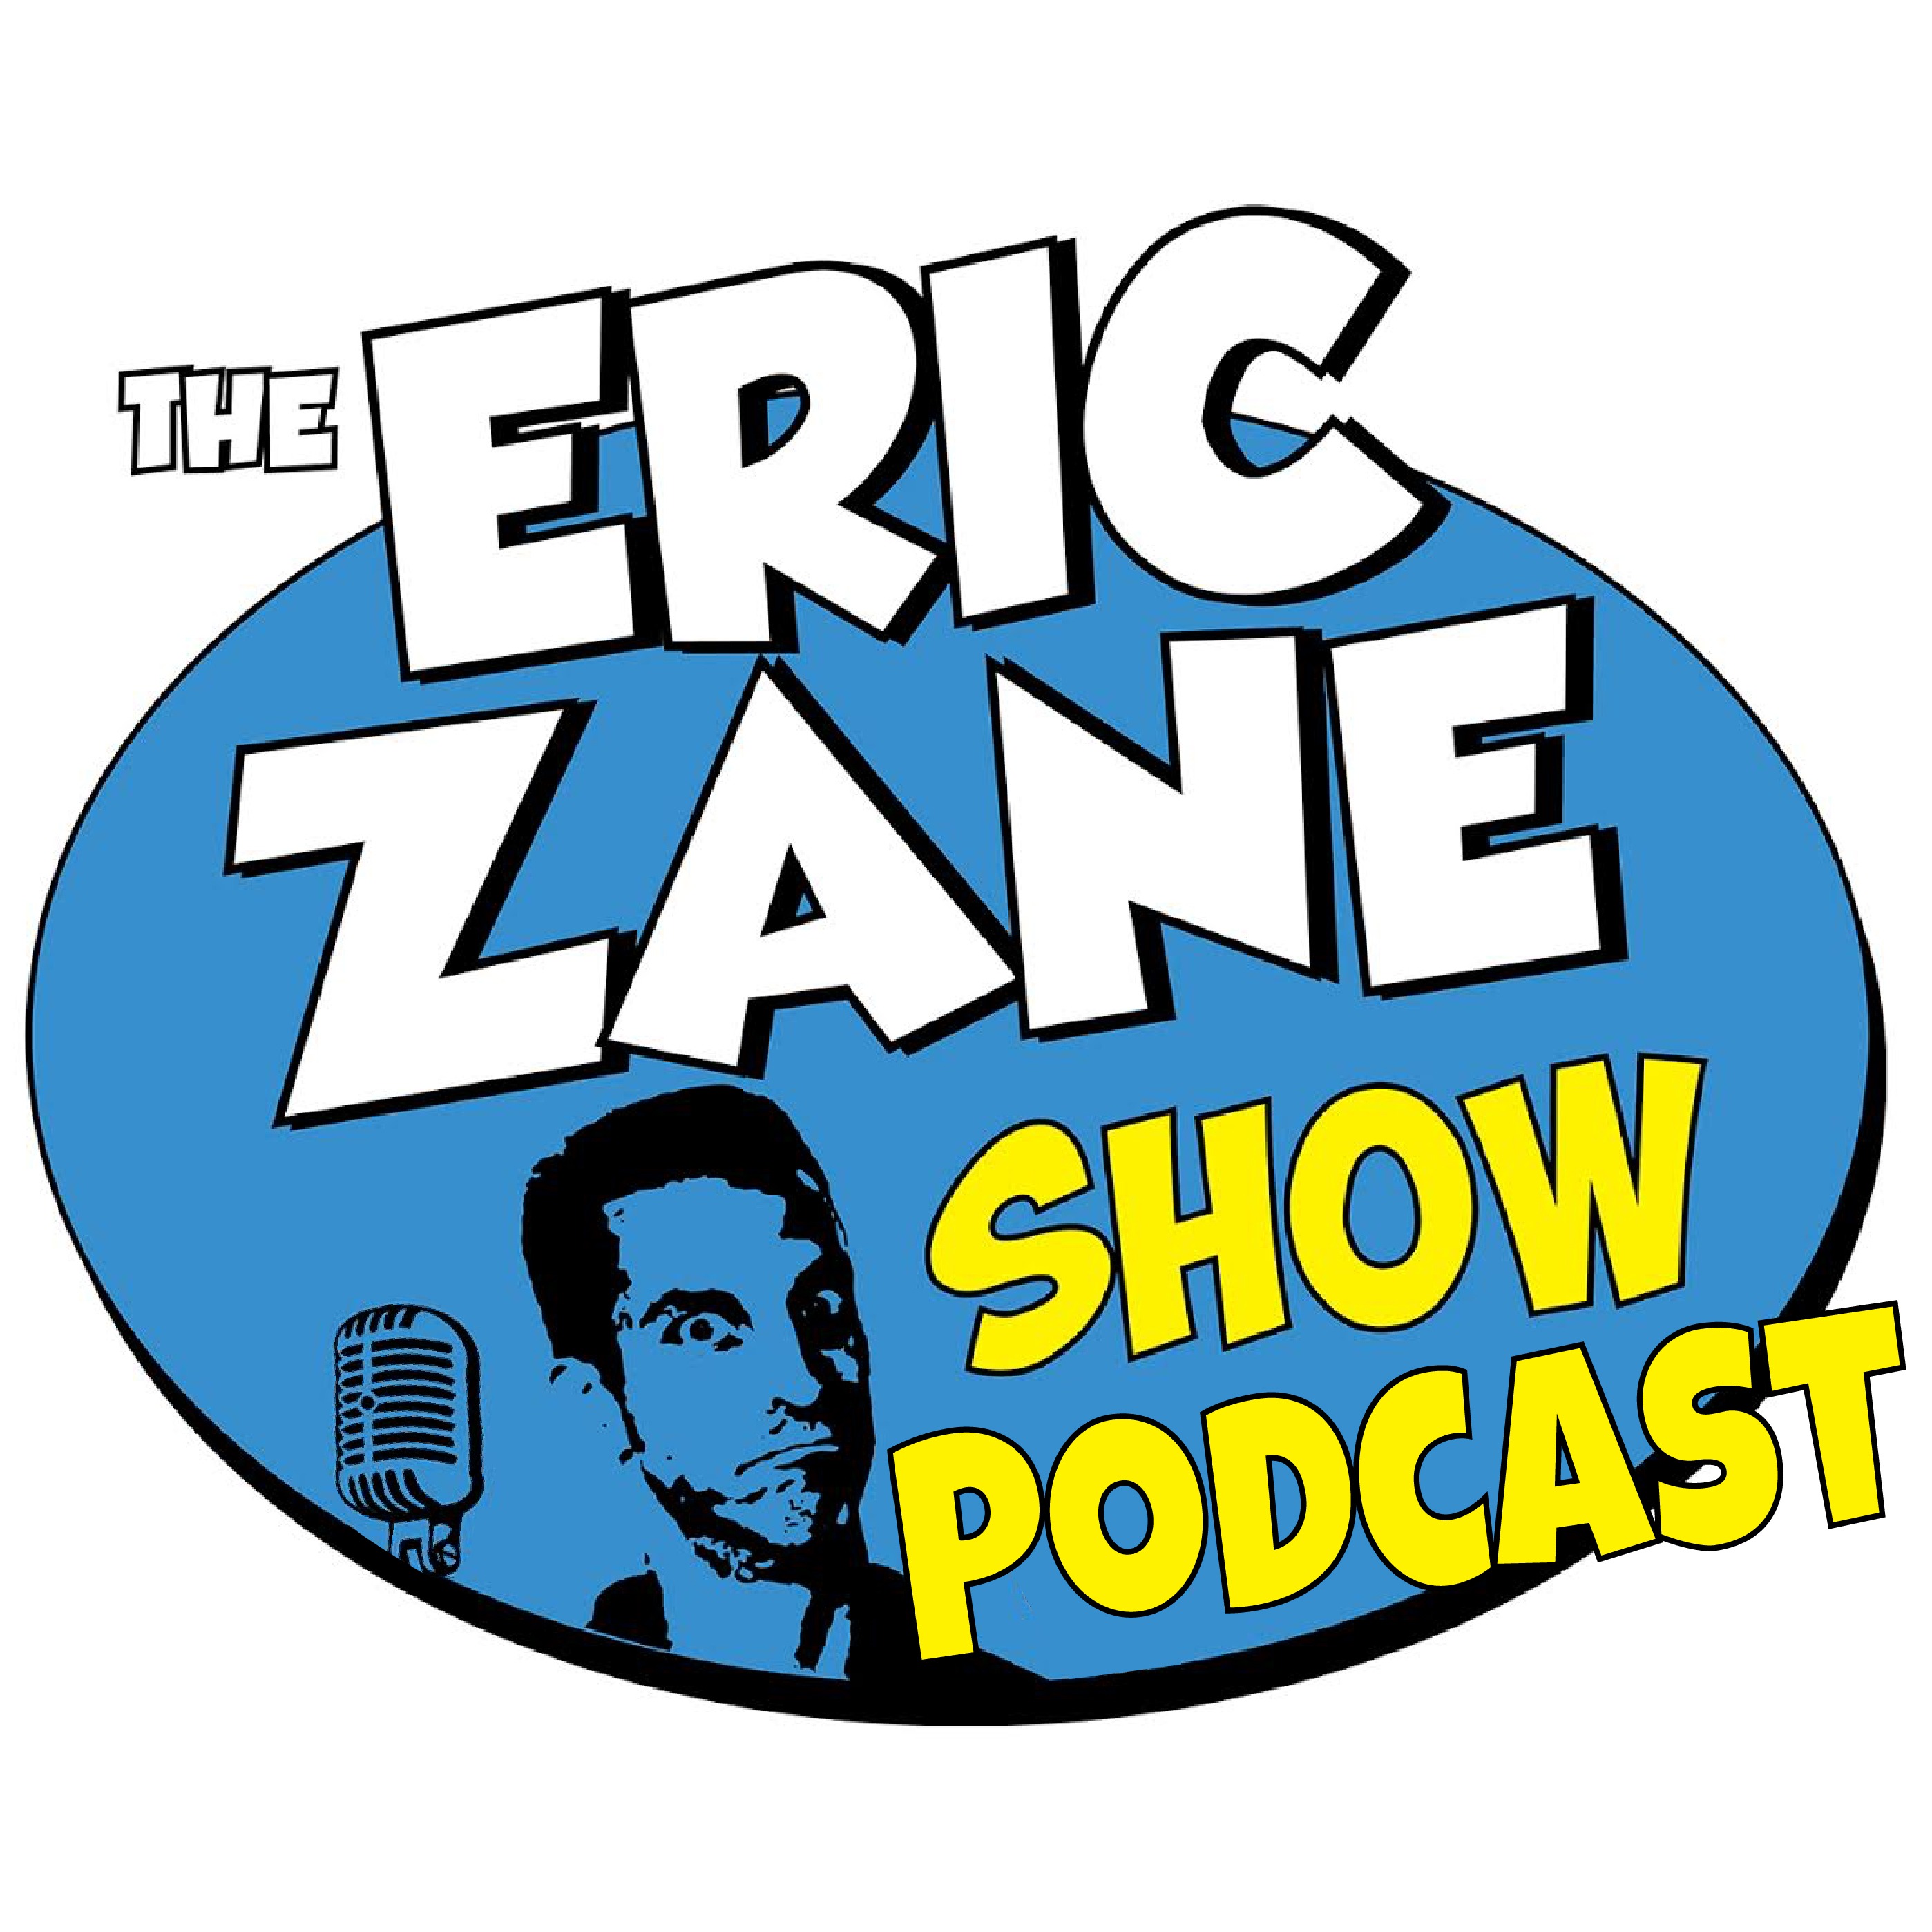 Eric Zane Show Podcast 833 The unplanned debut of Rick-less Abandon